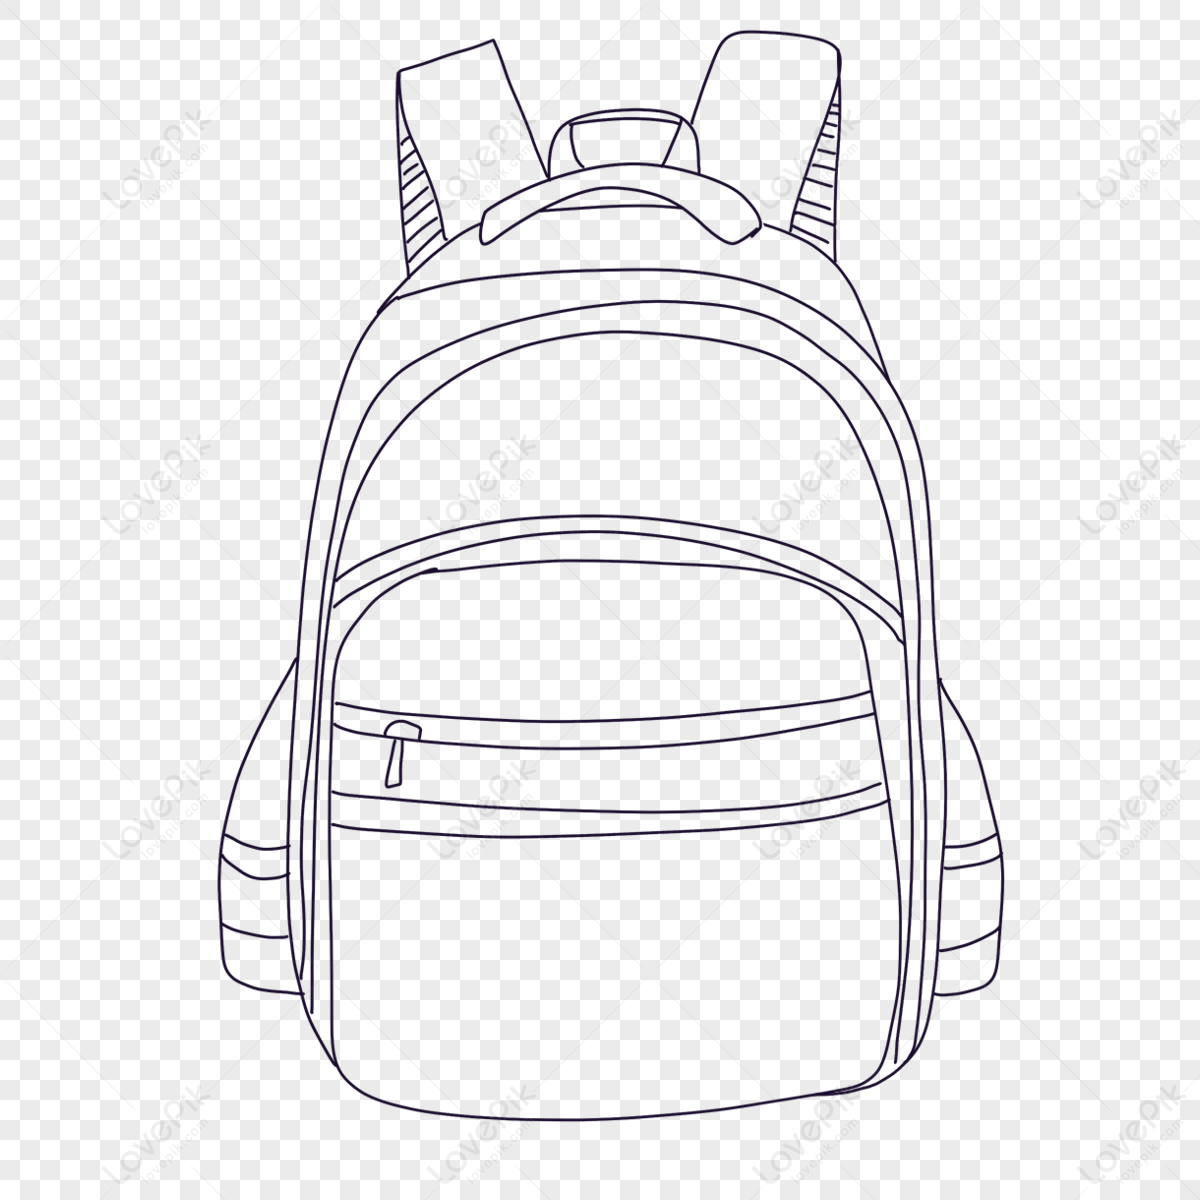 Doodle Purse Isolated In White, Excellent Vector Illustration, EPS 10  Royalty Free SVG, Cliparts, Vectors, and Stock Illustration. Image 43378537.